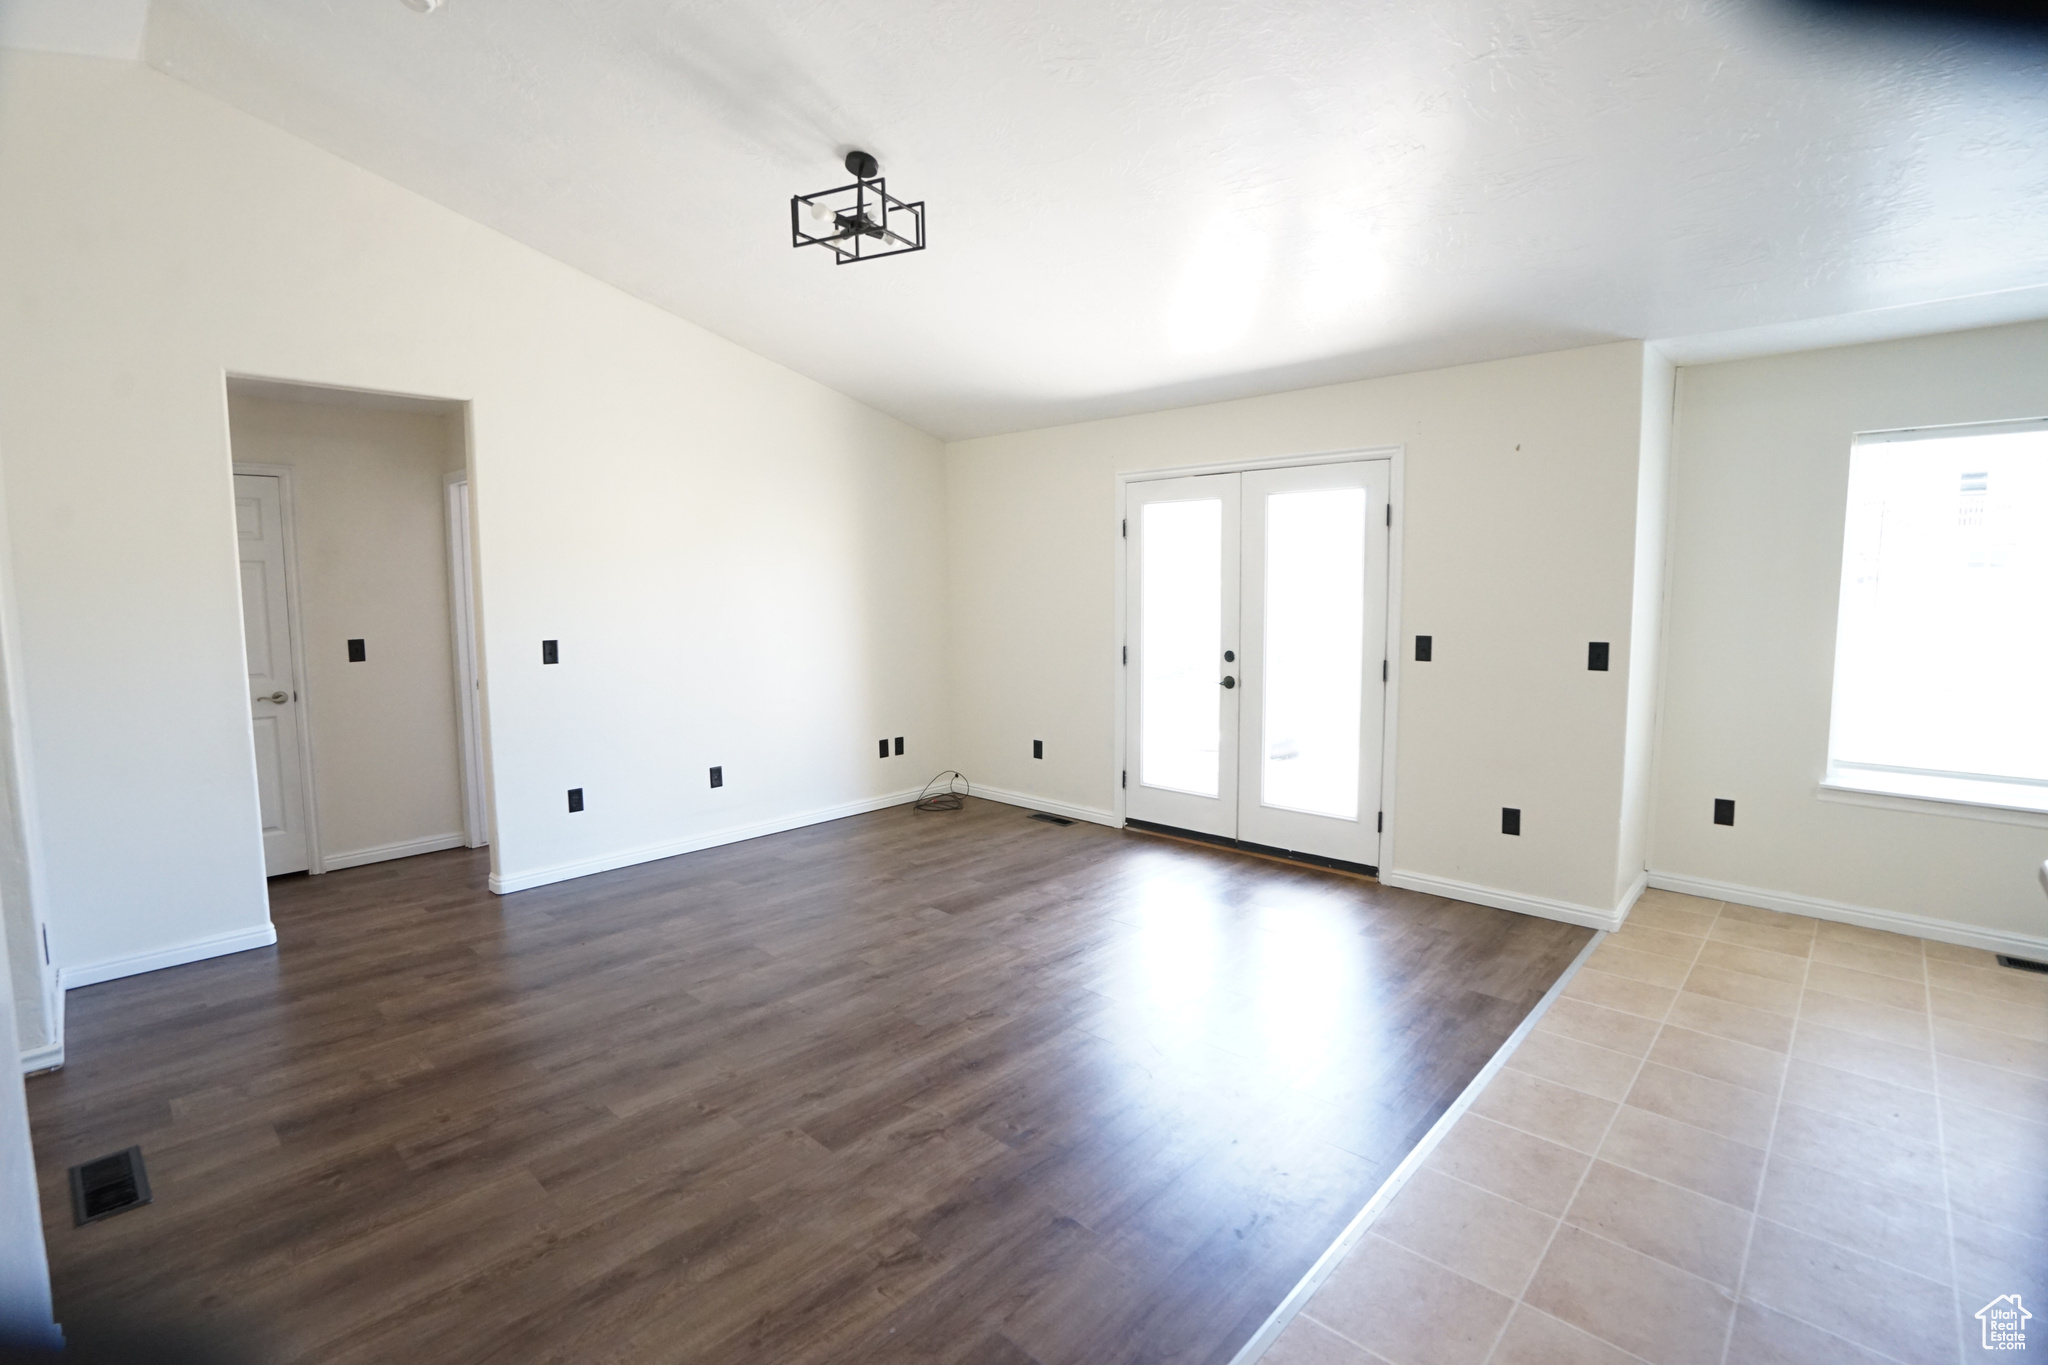 Empty room with lofted ceiling, french doors, and light tile flooring